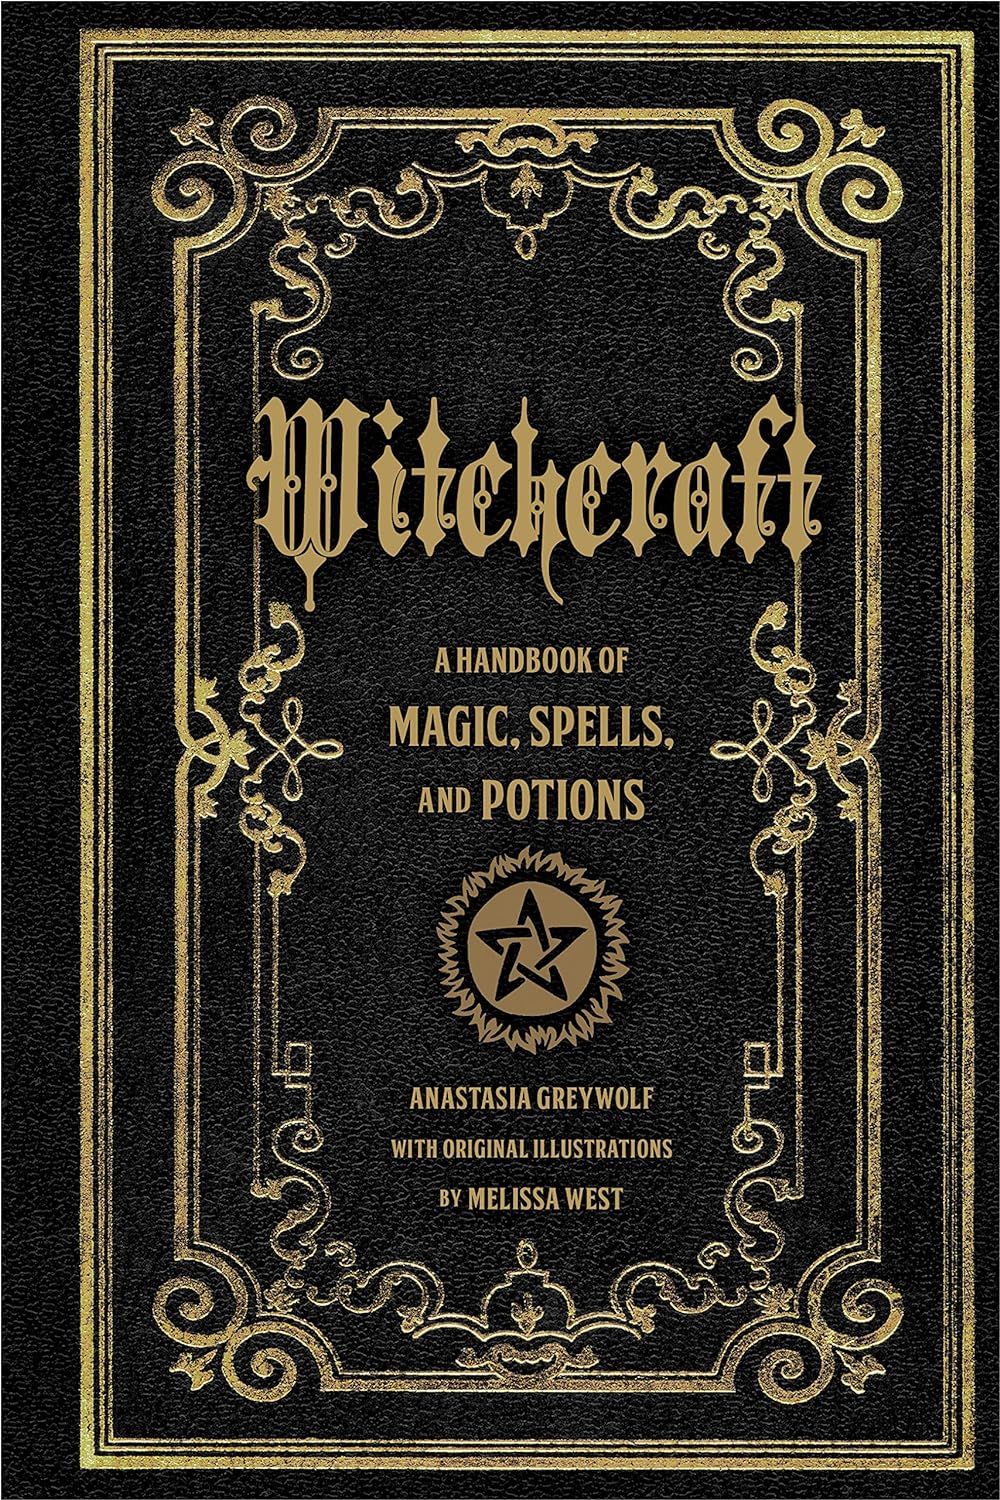 Witchcraft: A Handbook of Magic Spells and Potions (Mystical Handbook) Kindle Edition